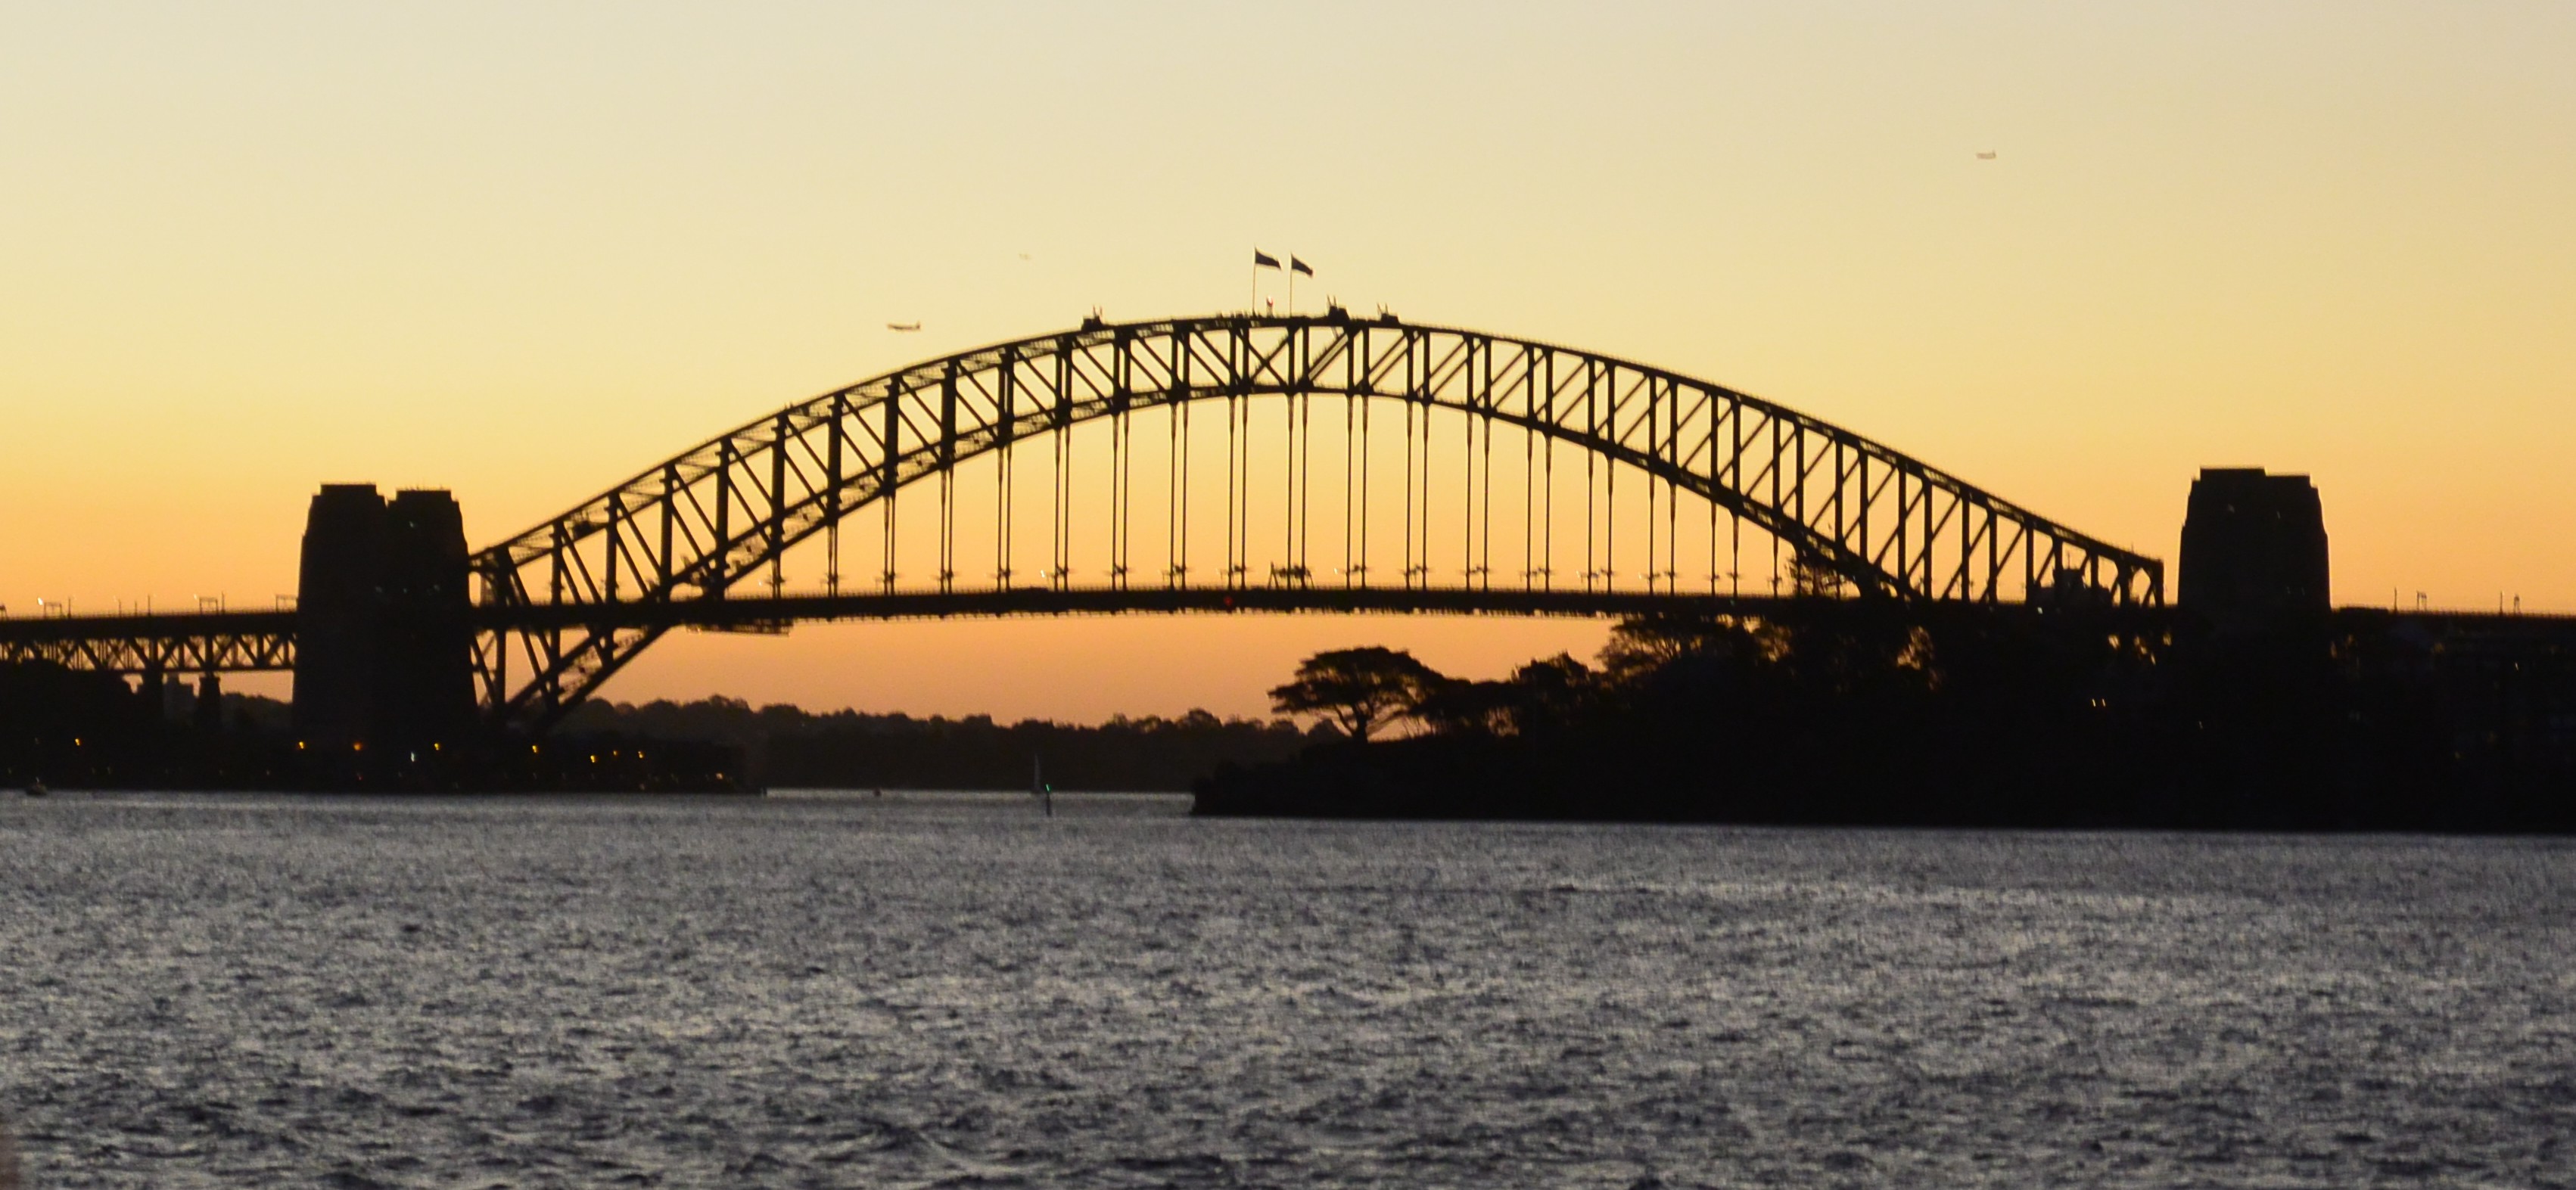 Sydney Harbour Bridge viewed from the Manly Ferry